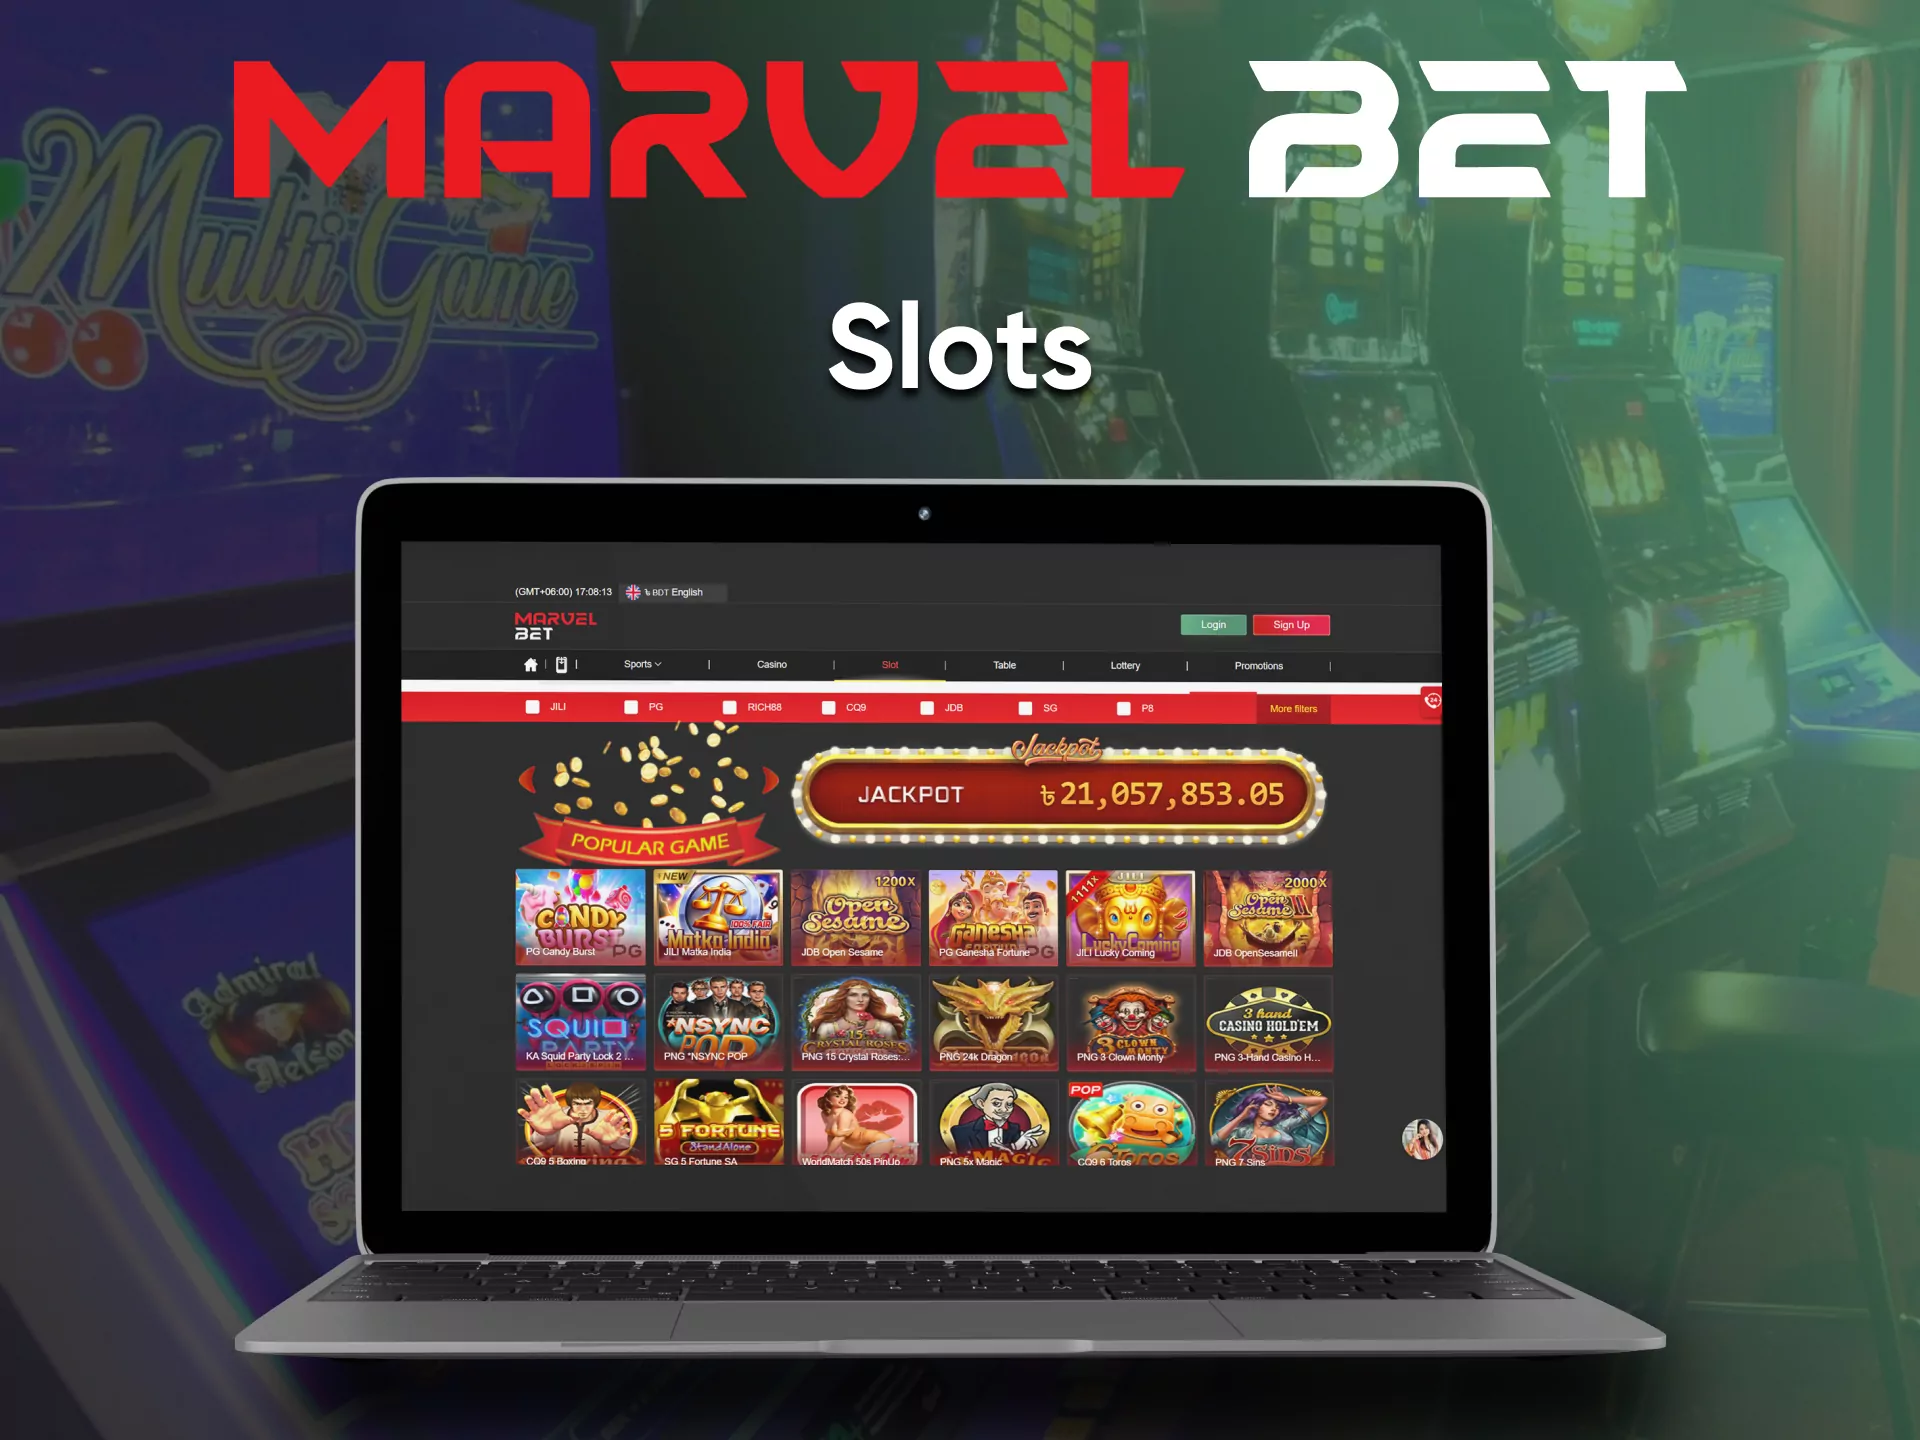 To play slots from Marvelbet, visit the Casino section.